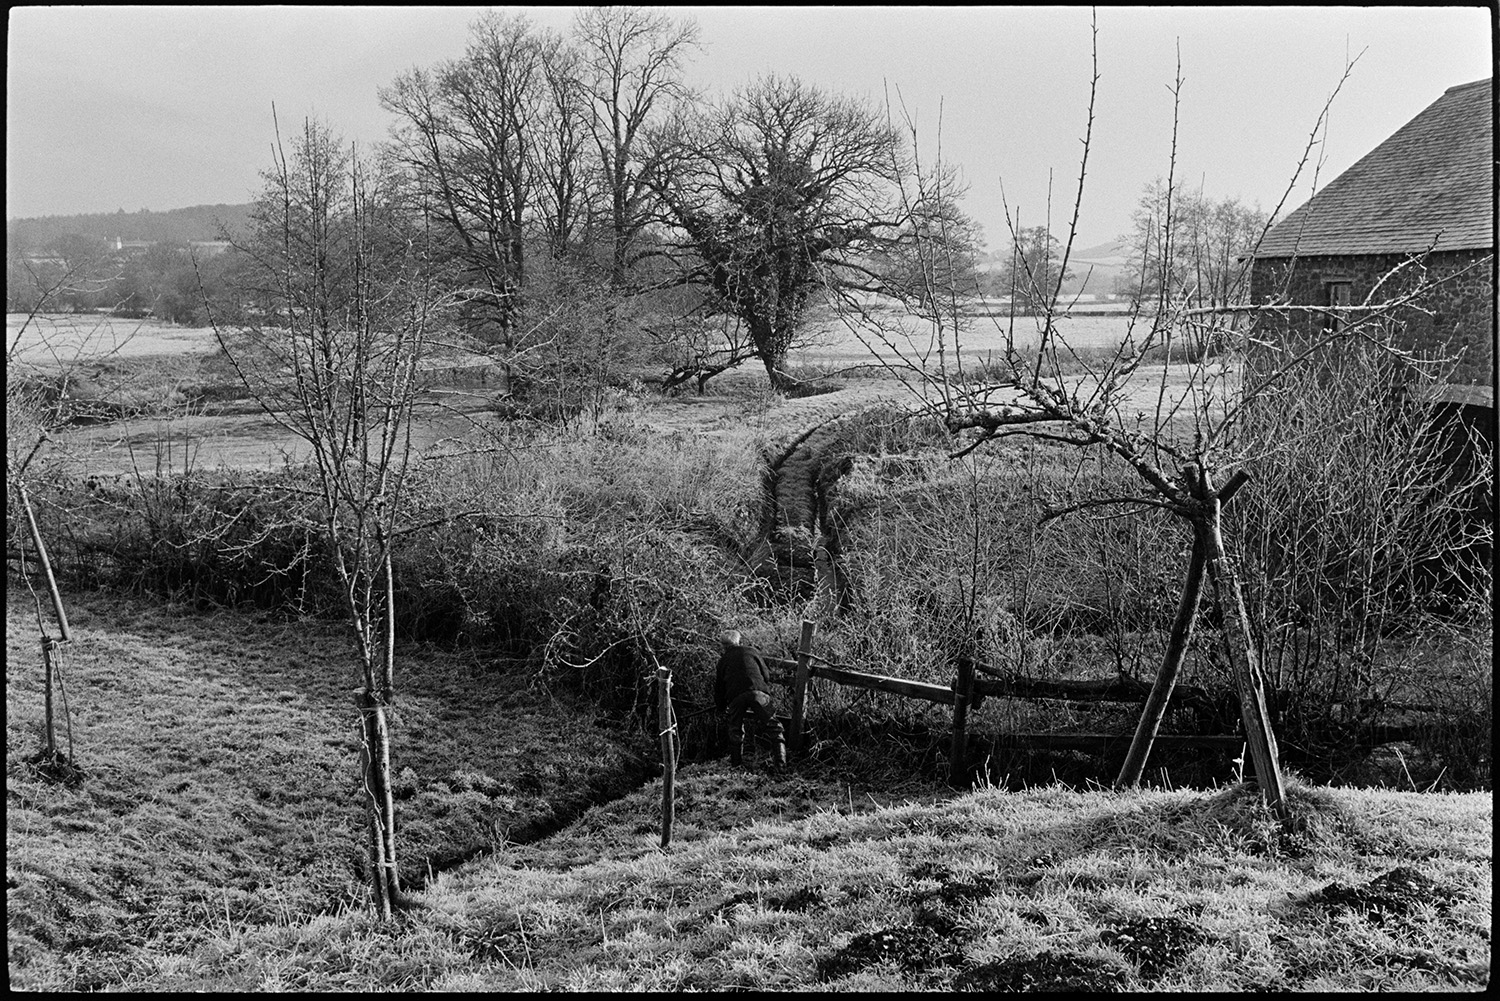 Orchards, Farmer laying hedge in frosty orchard, mill behind. 
[Bill Hammond laying a hedge by a fence in an orchard at Rashleigh Mill, bridge Reeve. The mill building and a track can be seen behind the field and the river Taw is visible in the background.]